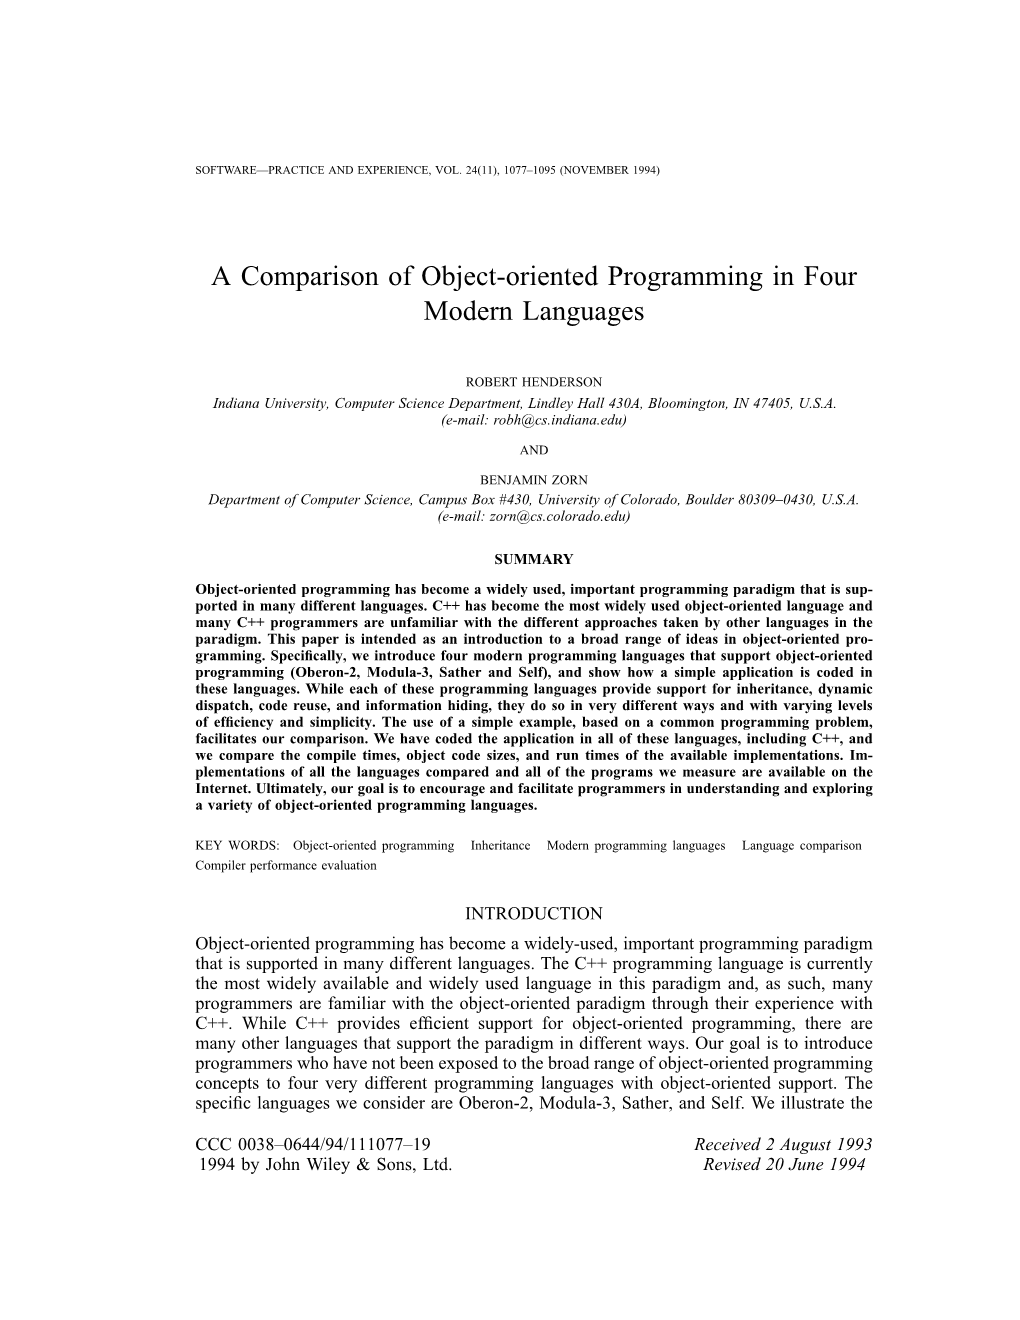 A Comparison of Object-Oriented Programming in Four Modern Languages